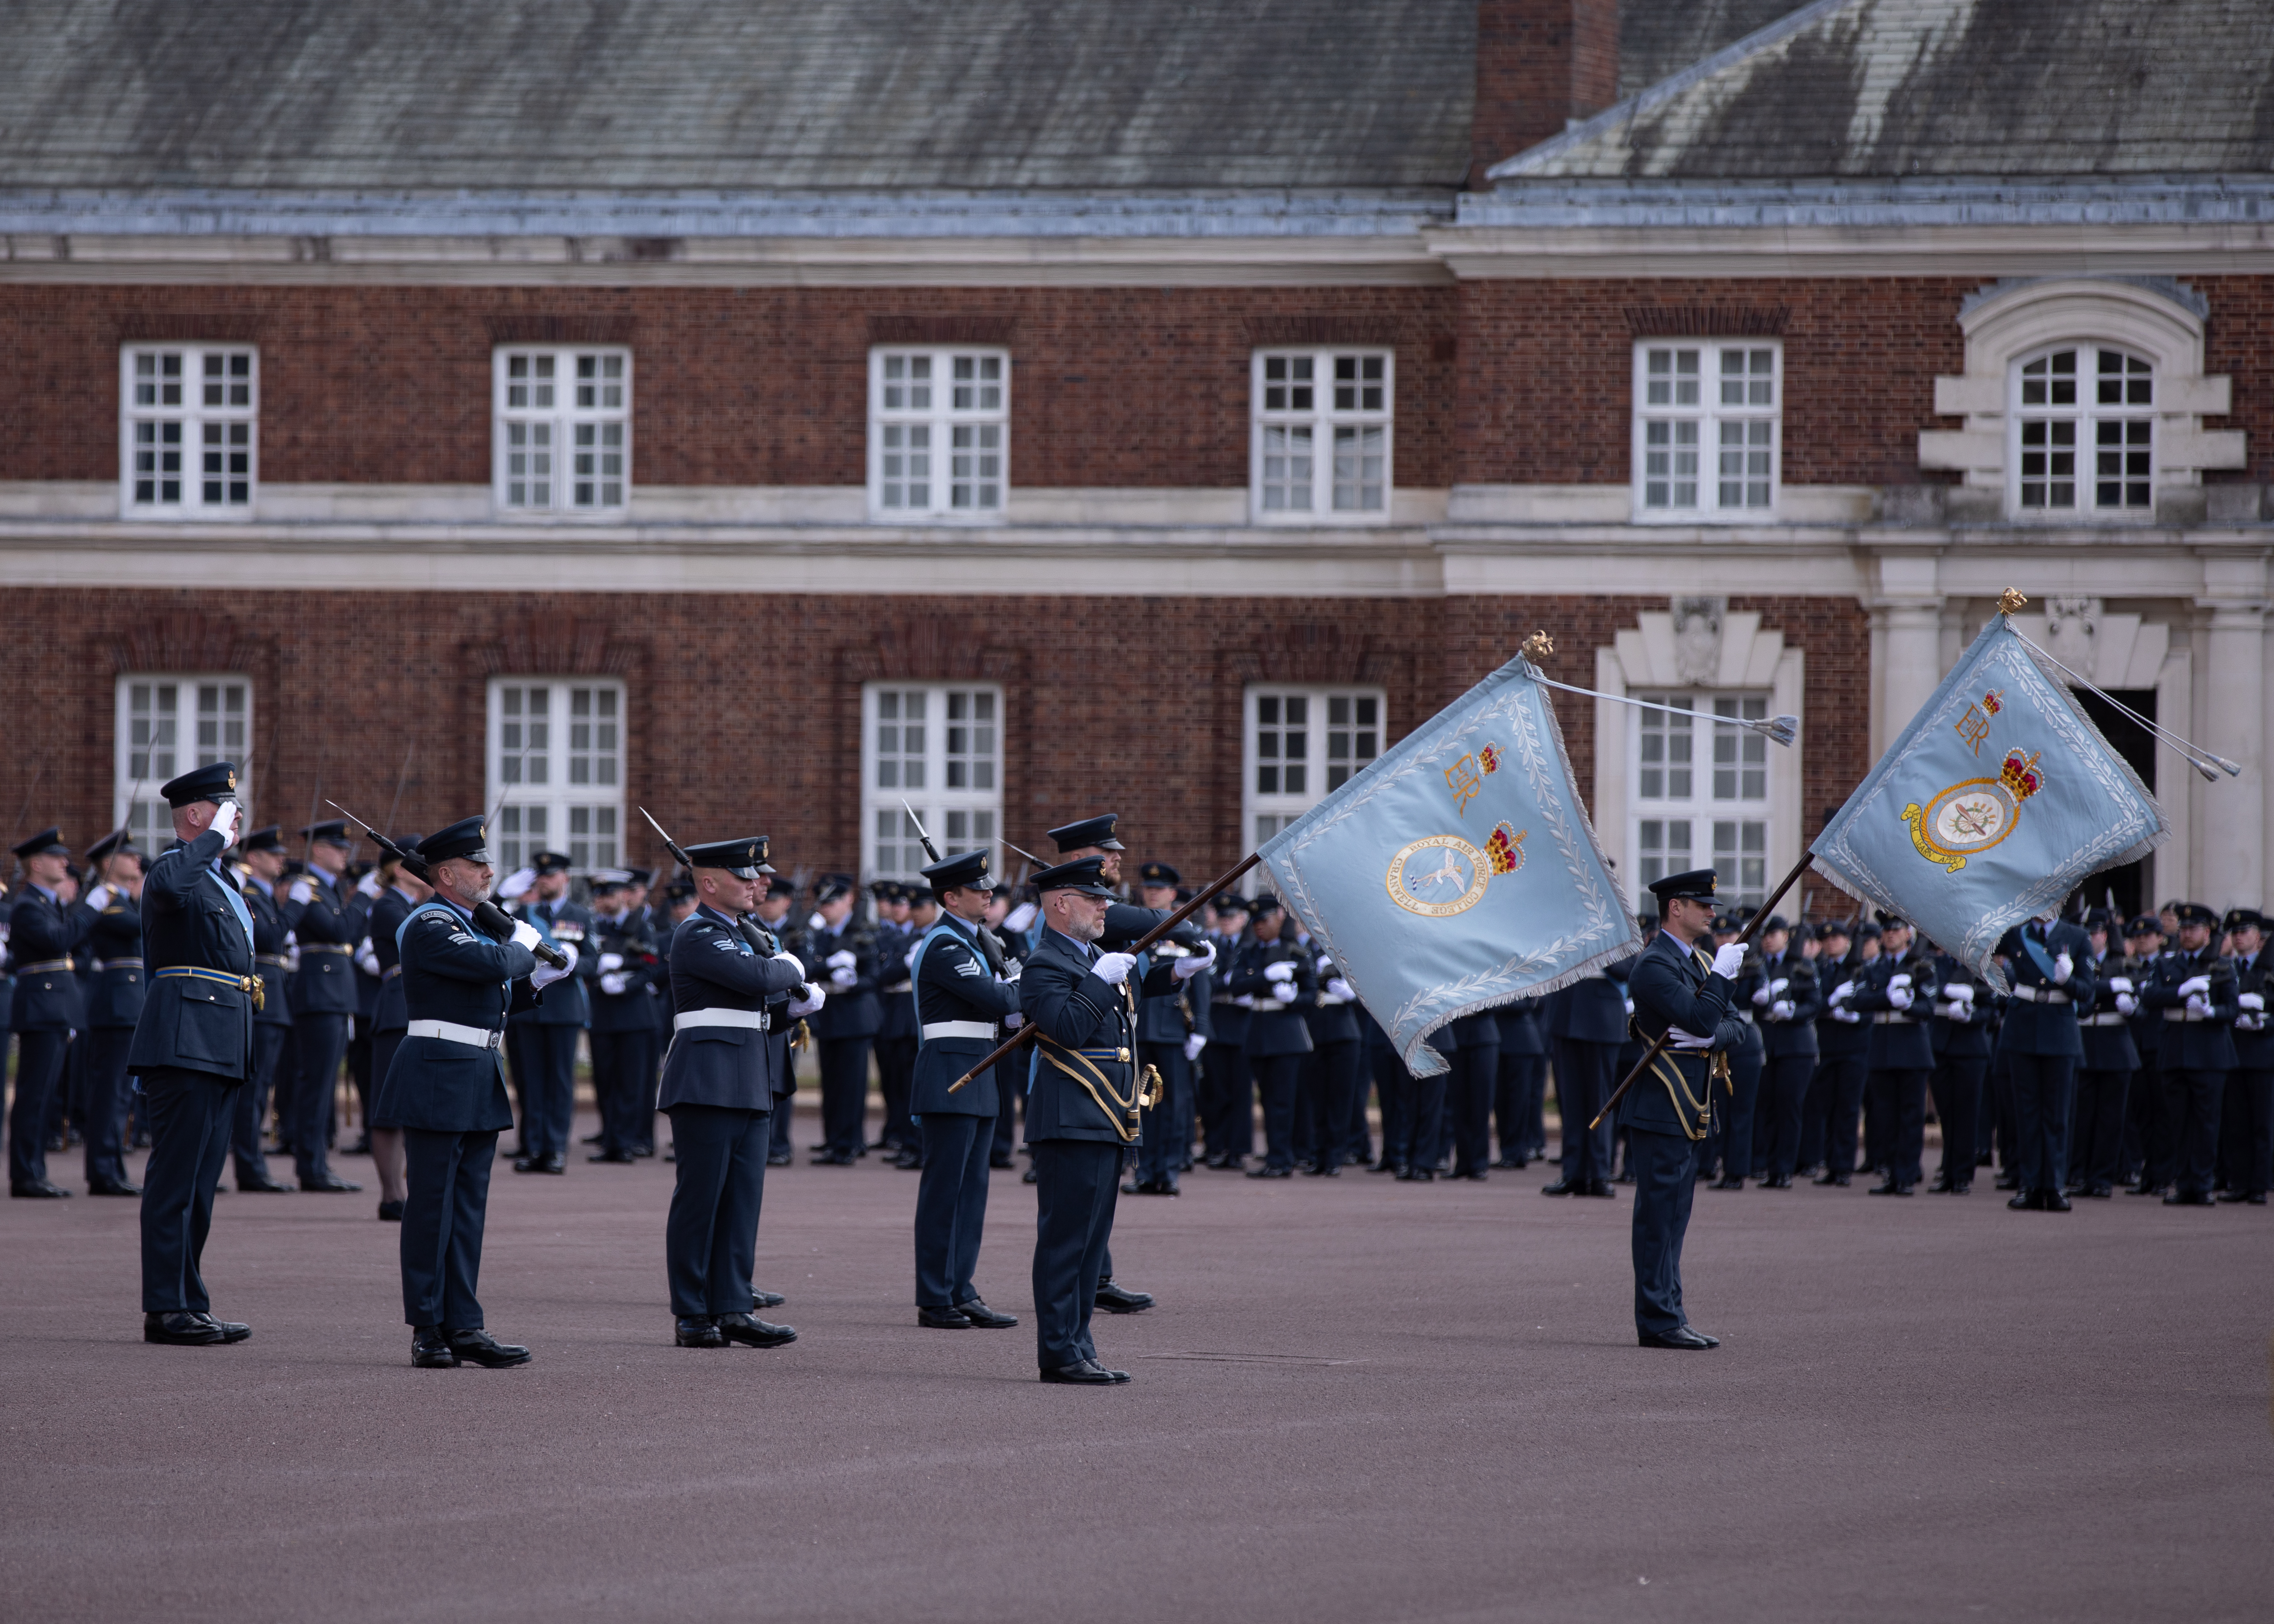 Personnel on parade with Colour flags.